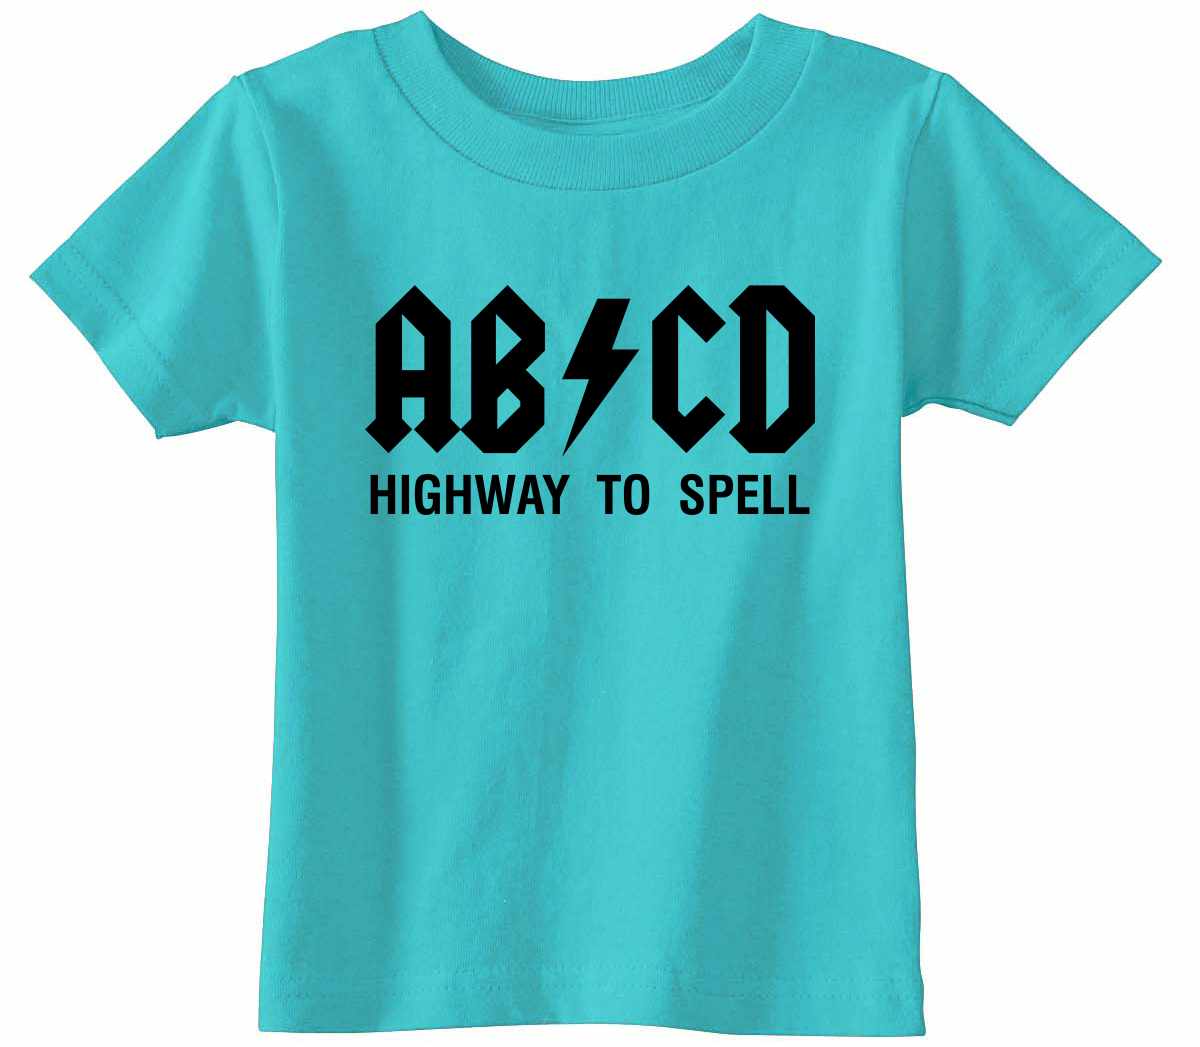 ABCD Highway To Spell on Infant-Toddler T-Shirt (#1236-7)